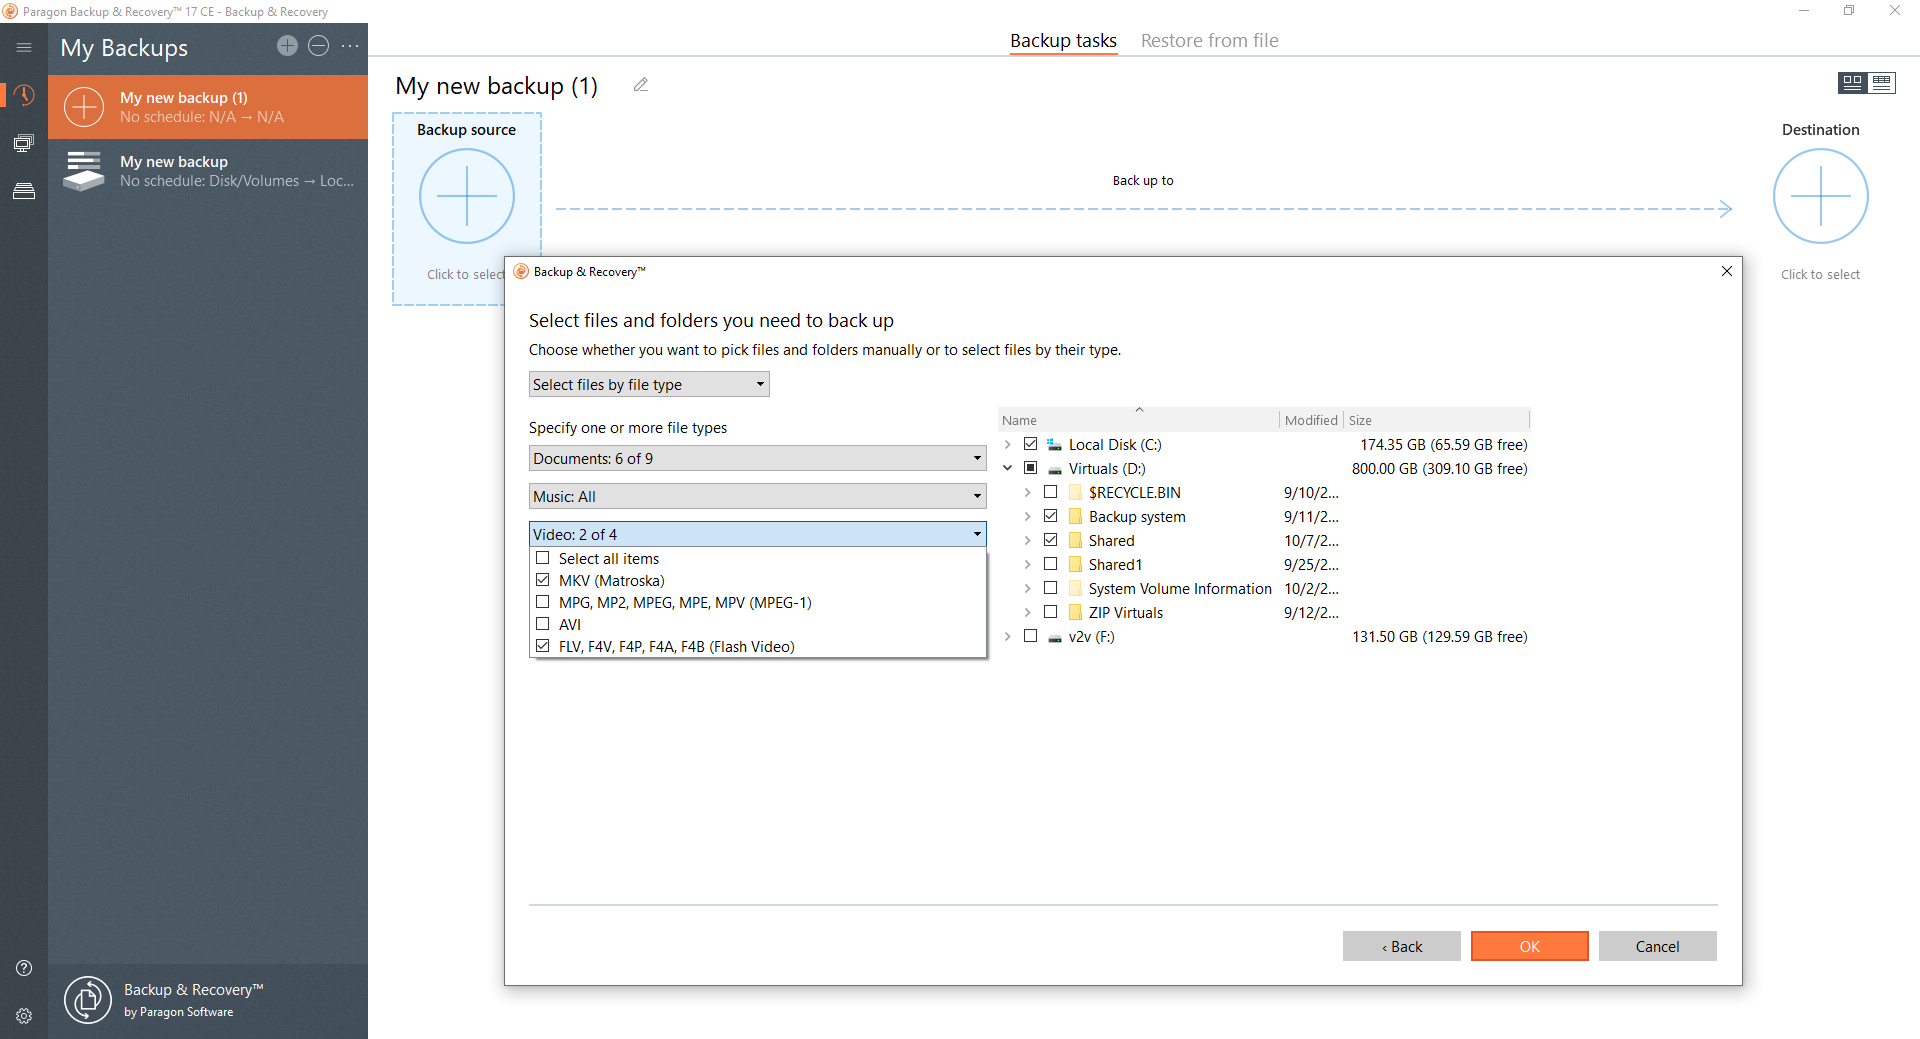 Free Data Recovery software | Paragon Backup & Recovery Community Edition